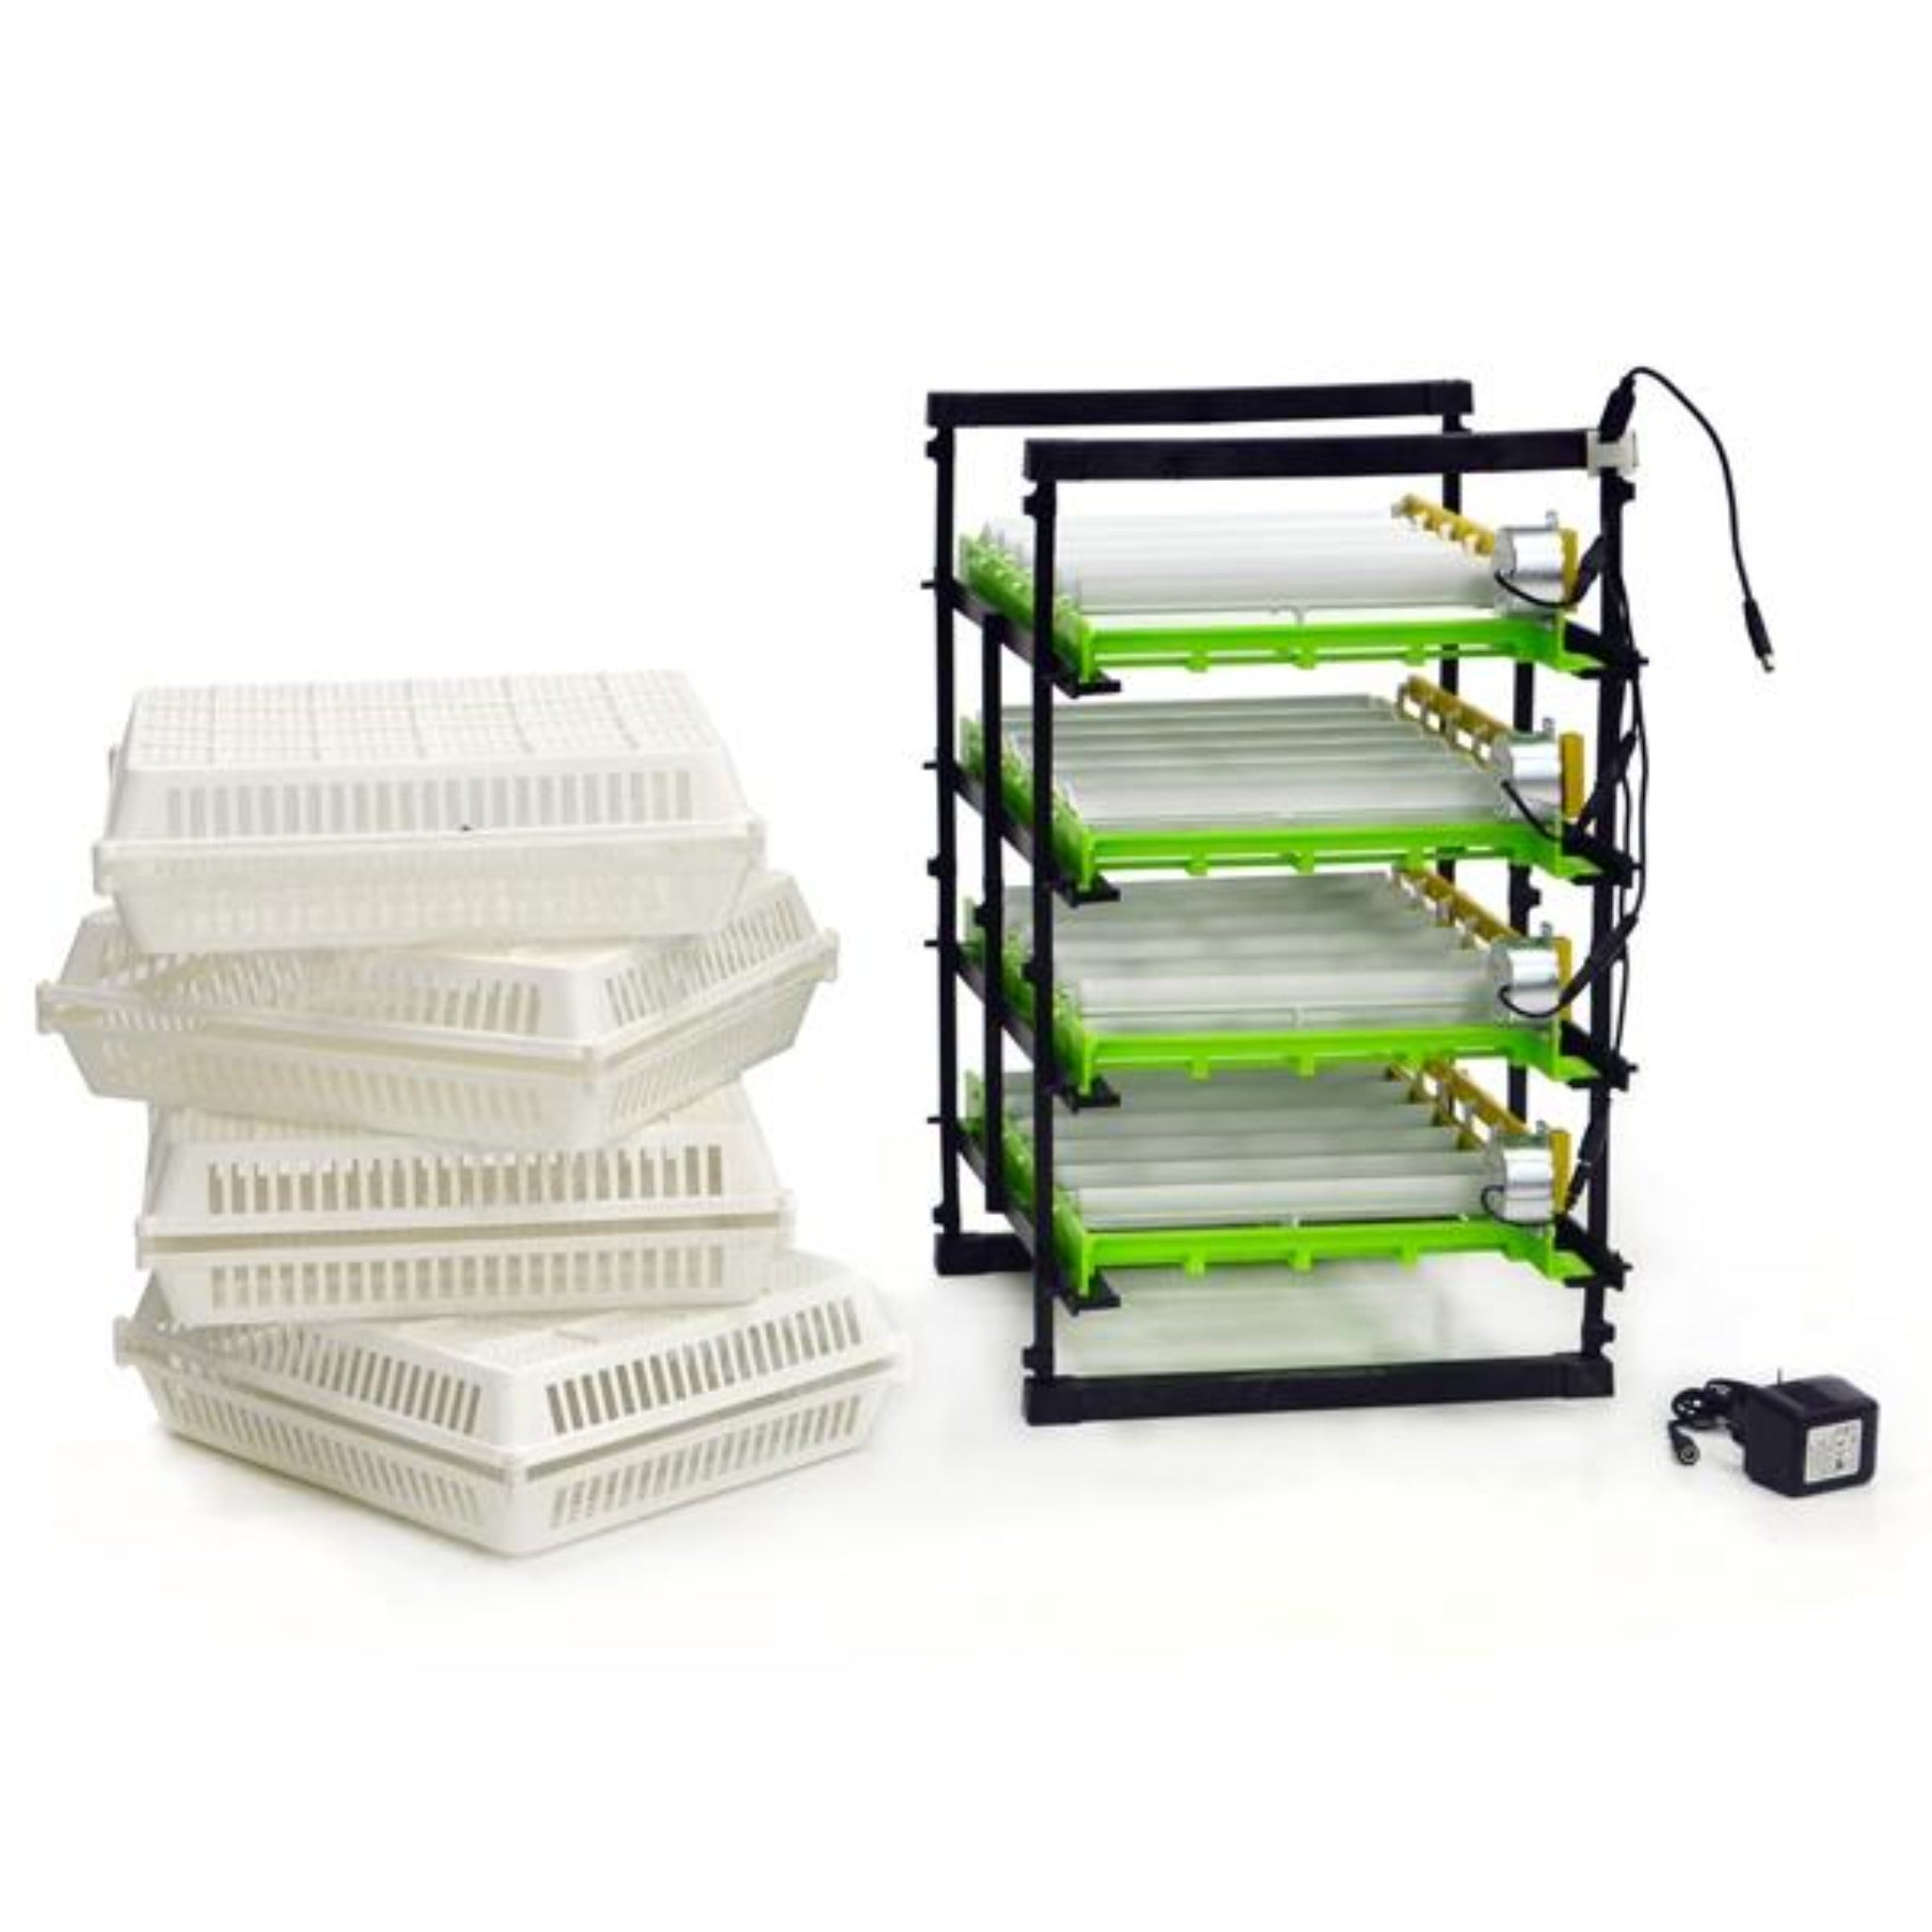 Hatching Time Cimuka. 120 egg turner with setting trays seen on egg rack. Egg turning motors visible. Hatching baskets can be seen next to racks. Power cord visible in front of egg racks.